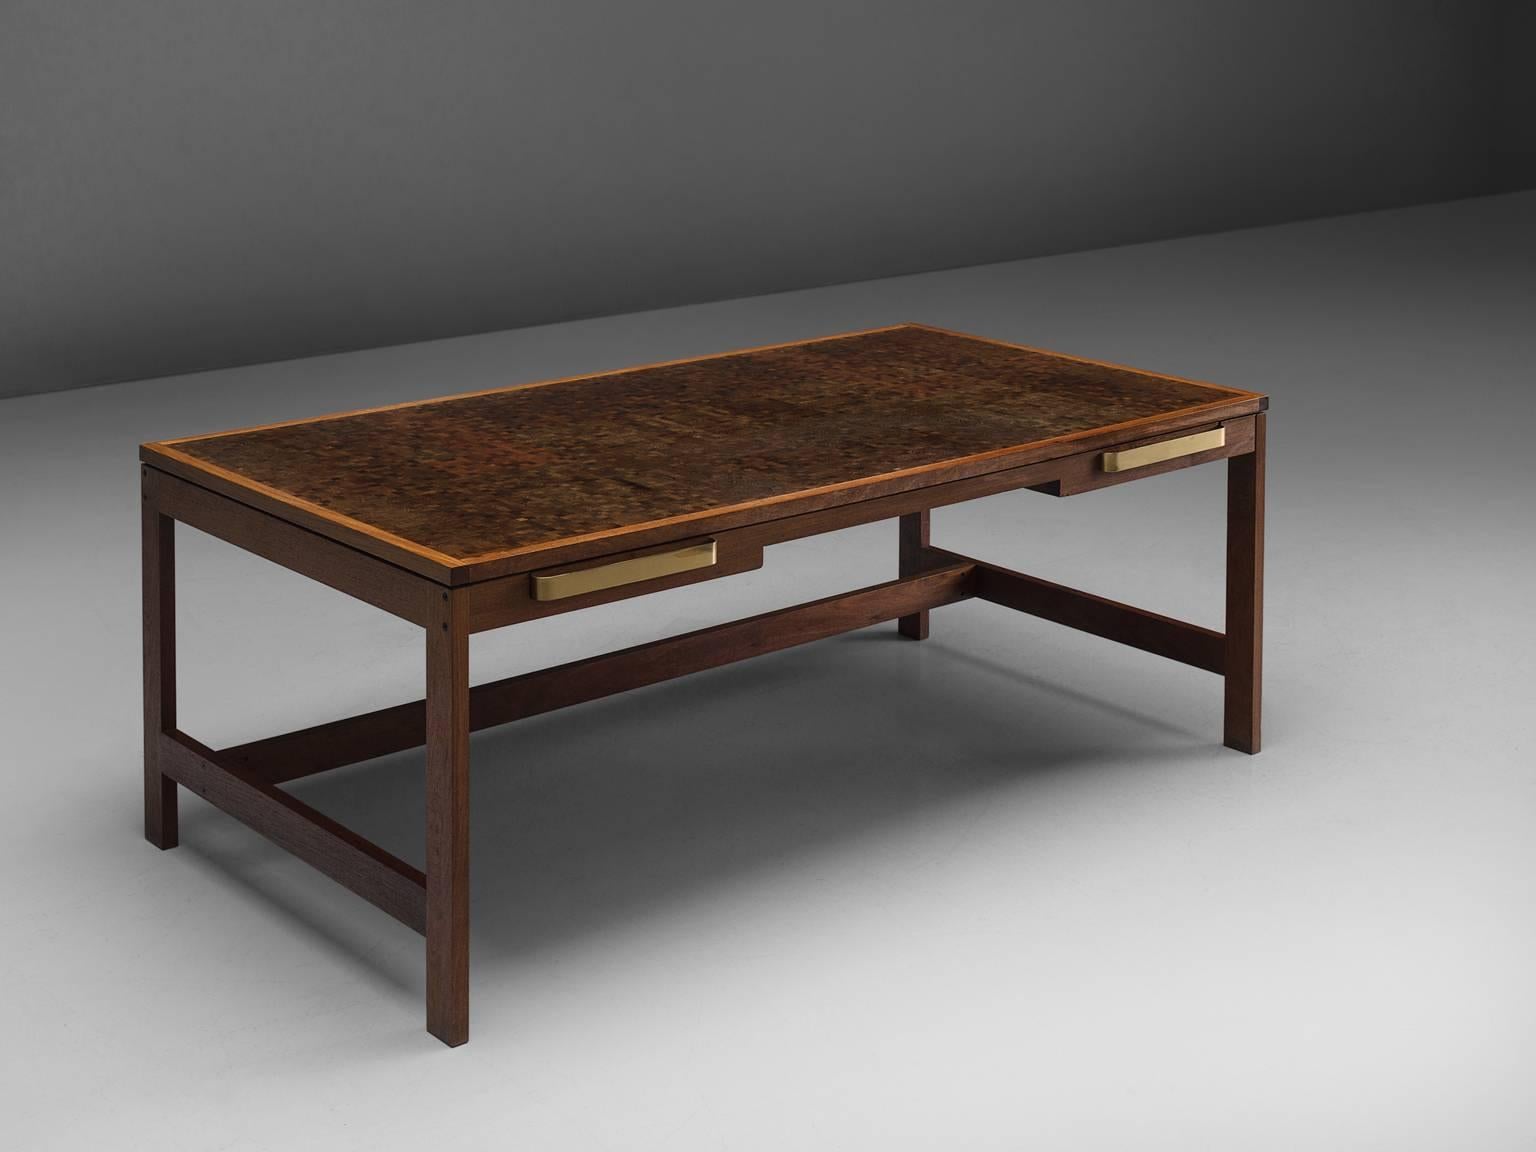 Rolf Middelboe for Gorm Lindum, dining table, brass and mahogany, Denmark, circa 1970.

This inlaid desk table by Rolf Middelboe for Gorm Lindum has mosaic structured tabletop, that consist of cubical pieces end-grain mahogany and other types of